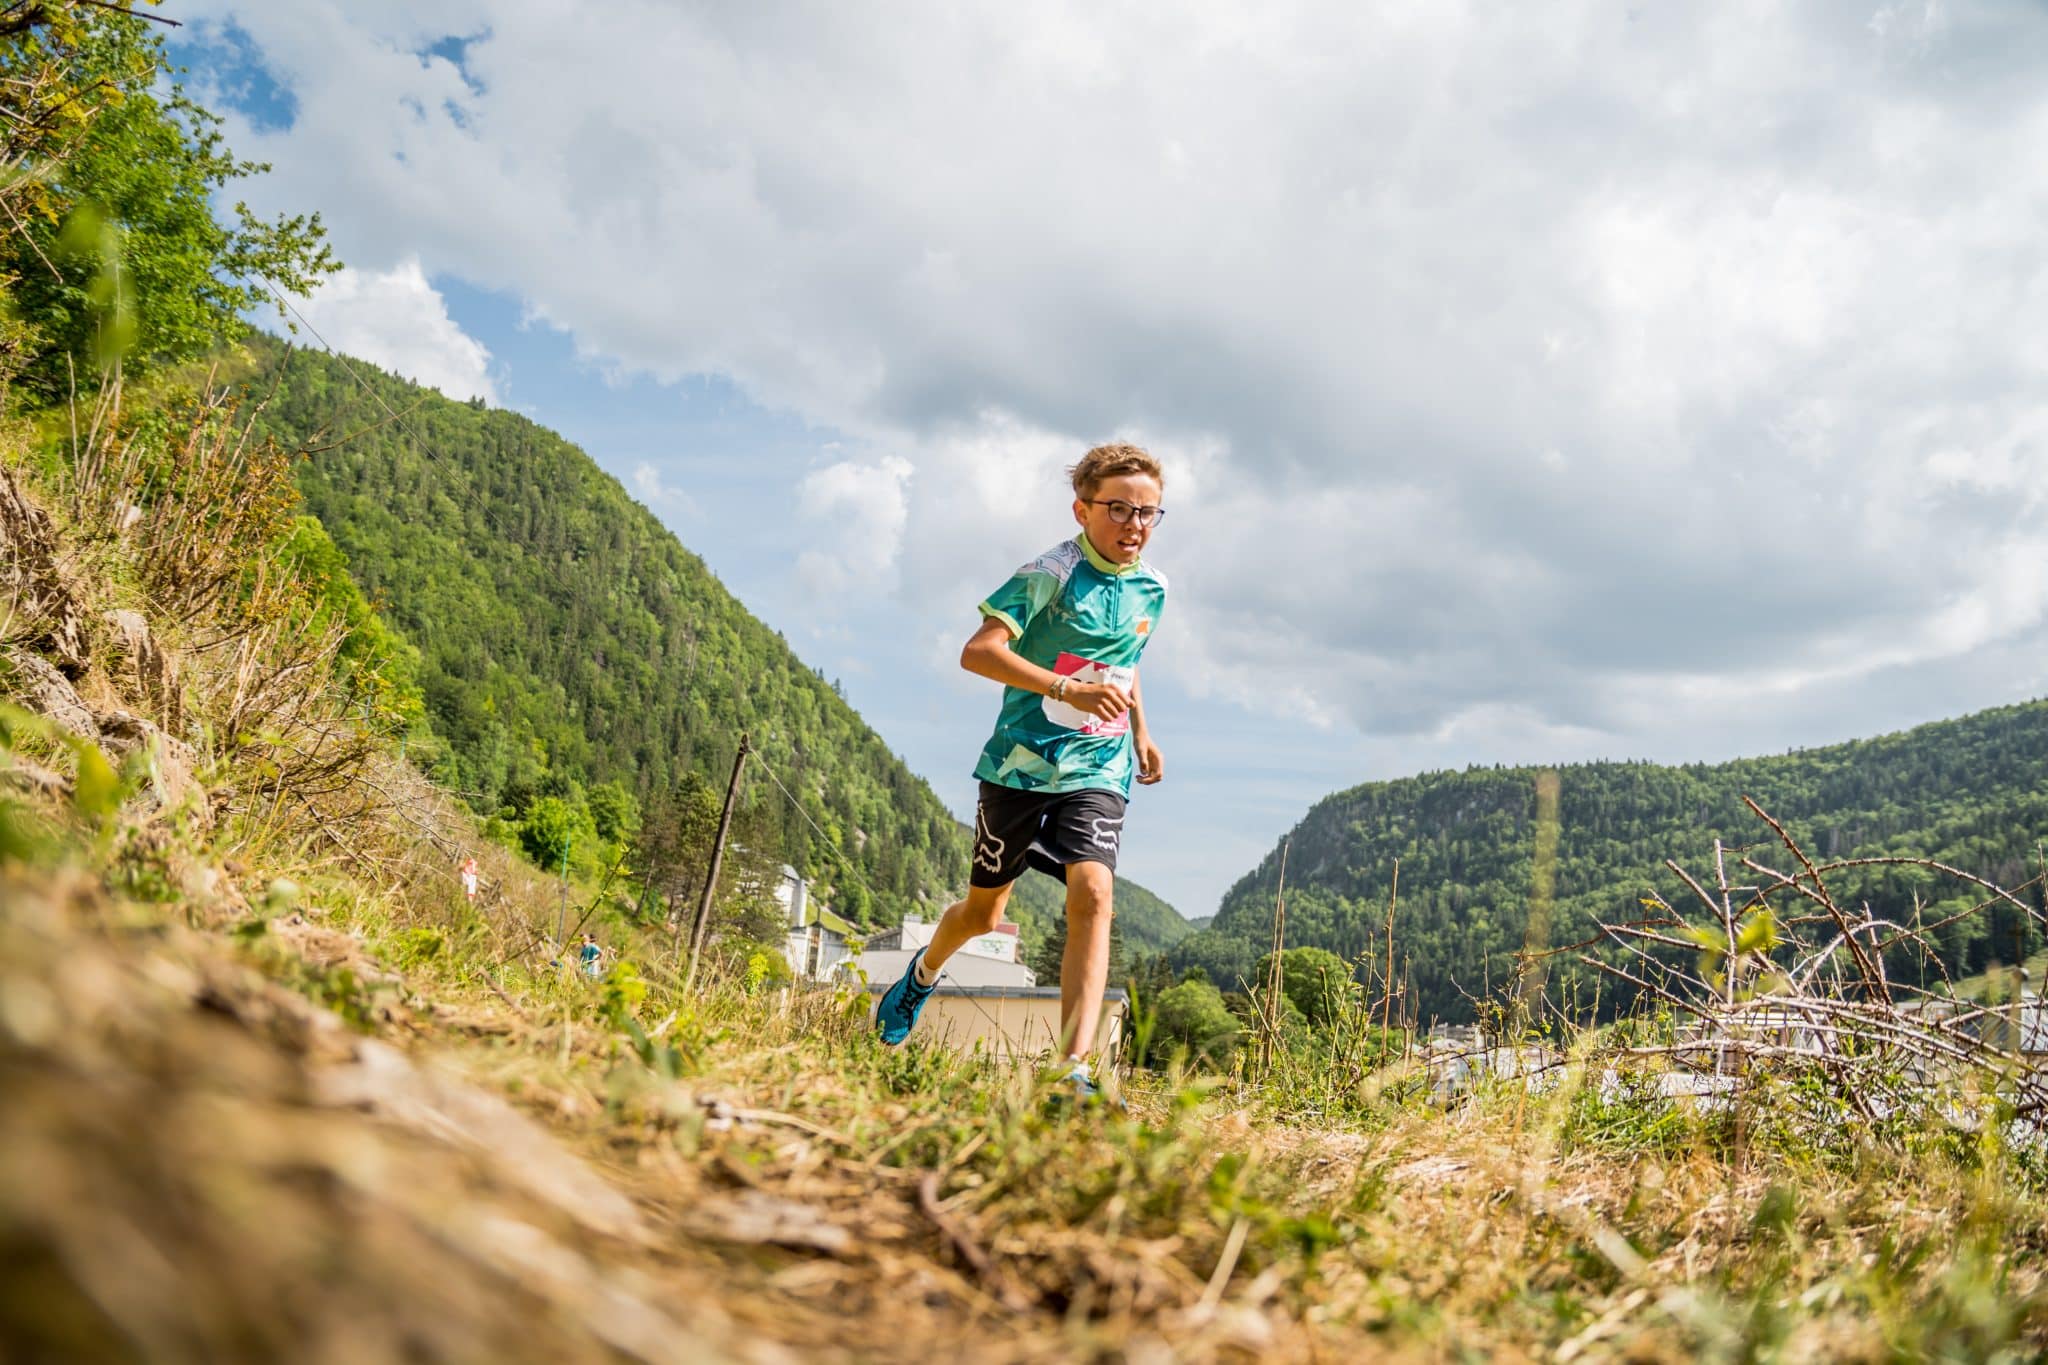 The Transju Trails child race in the Jura Mountains